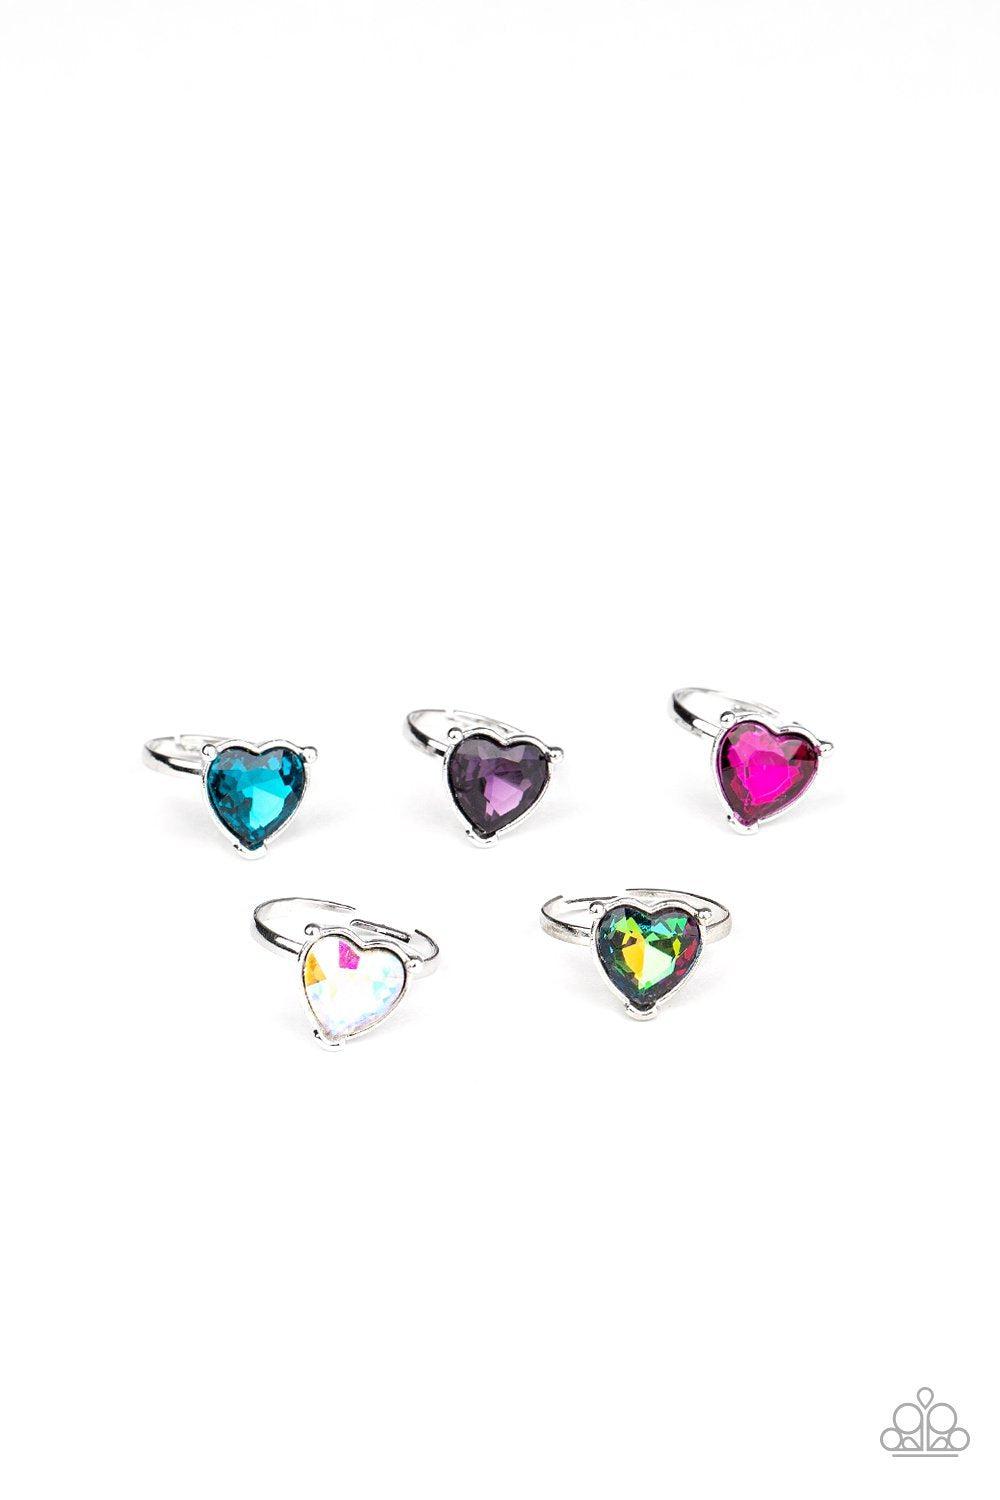 Starlet Shimmer Children&#39;s Gem Heart Rings - Paparazzi Accessories (set of 5)-CarasShop.com - $5 Jewelry by Cara Jewels